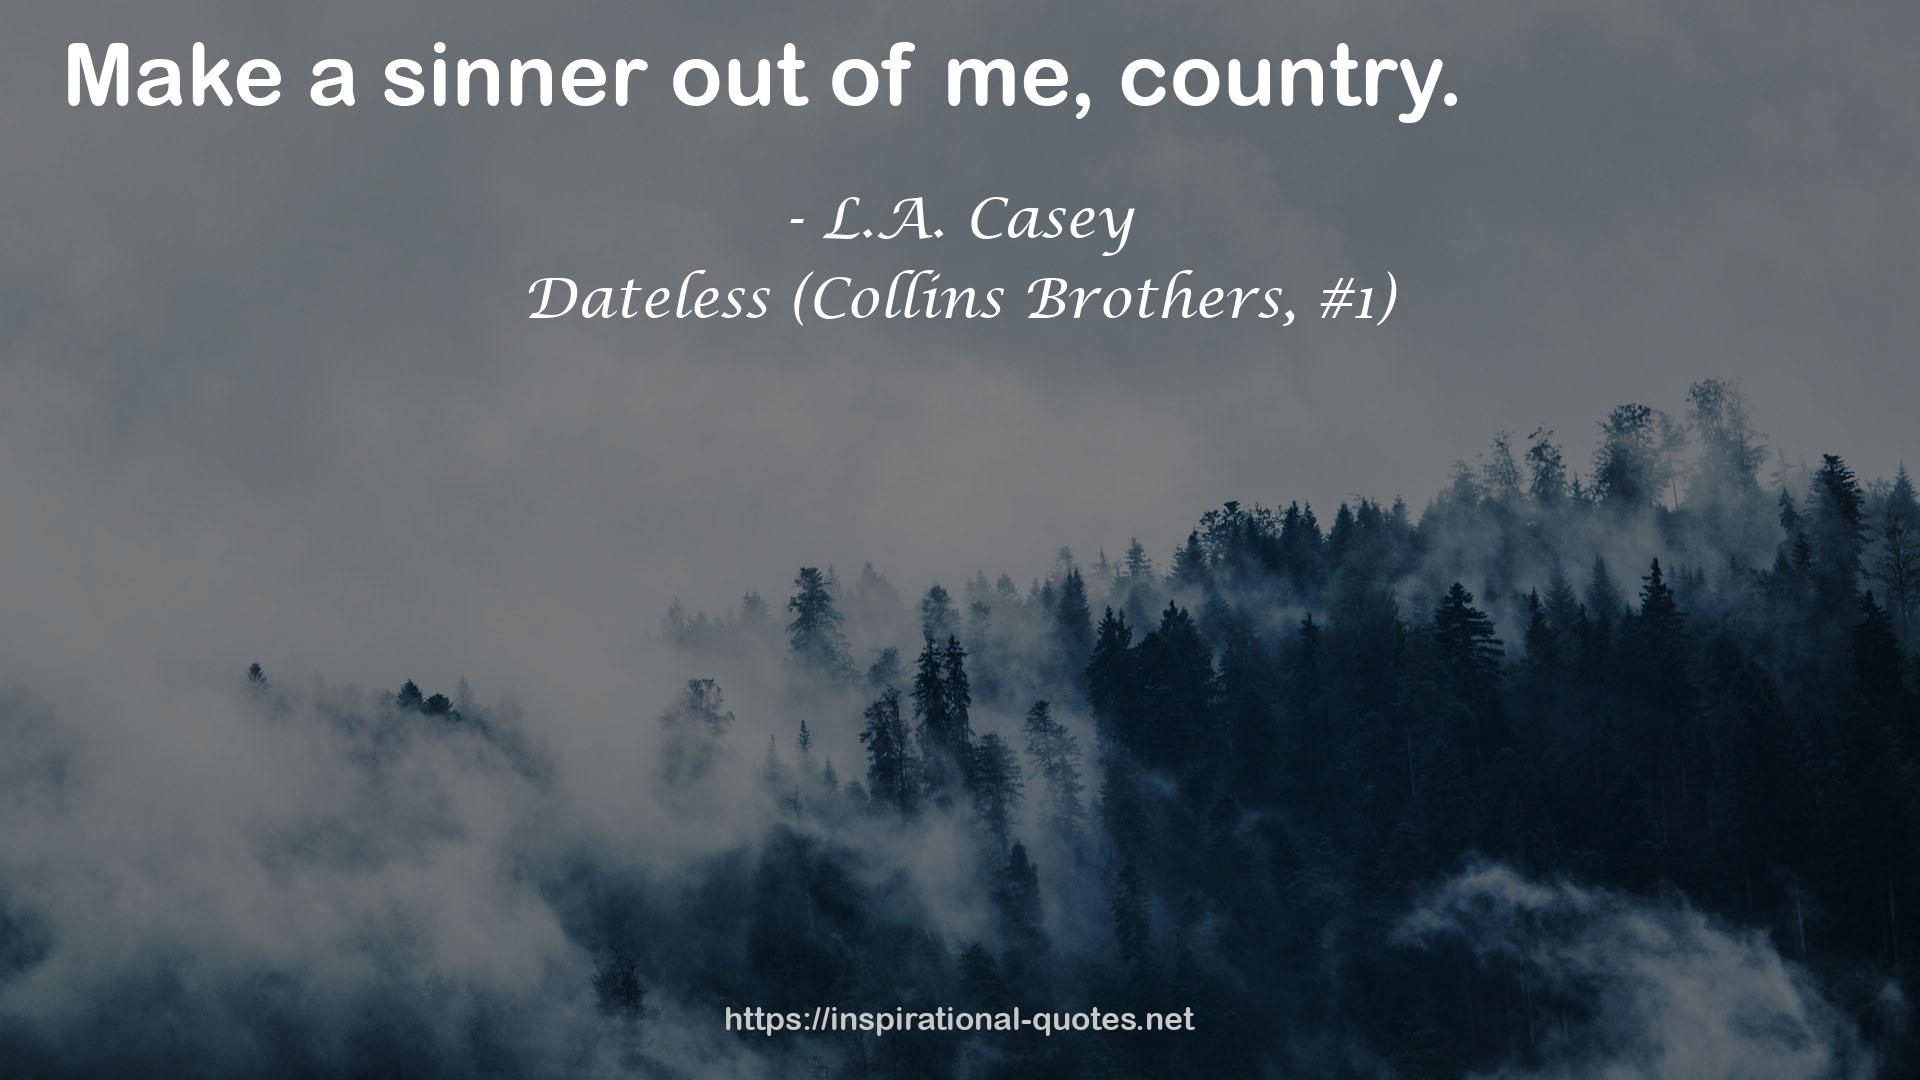 Dateless (Collins Brothers, #1) QUOTES